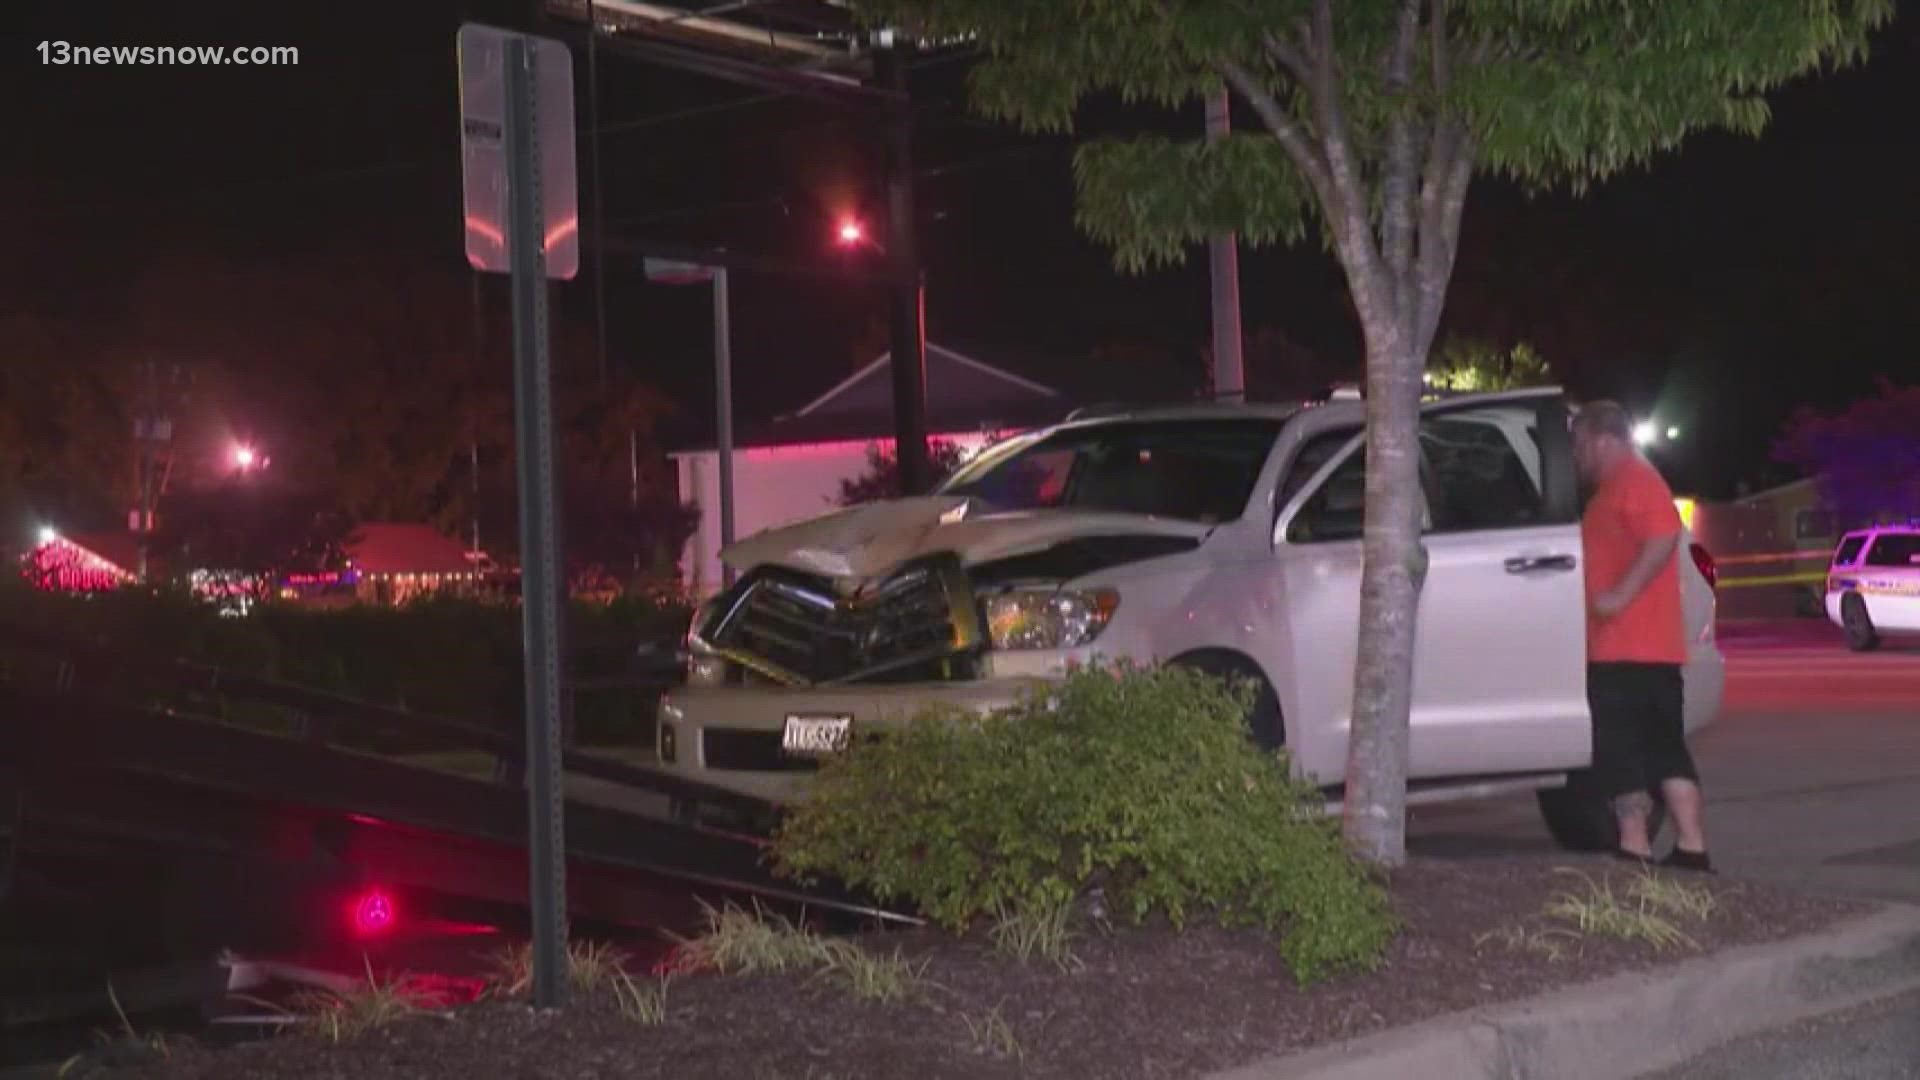 The Virginia Beach Town Center crash makes three people killed by cars within the past week locally.